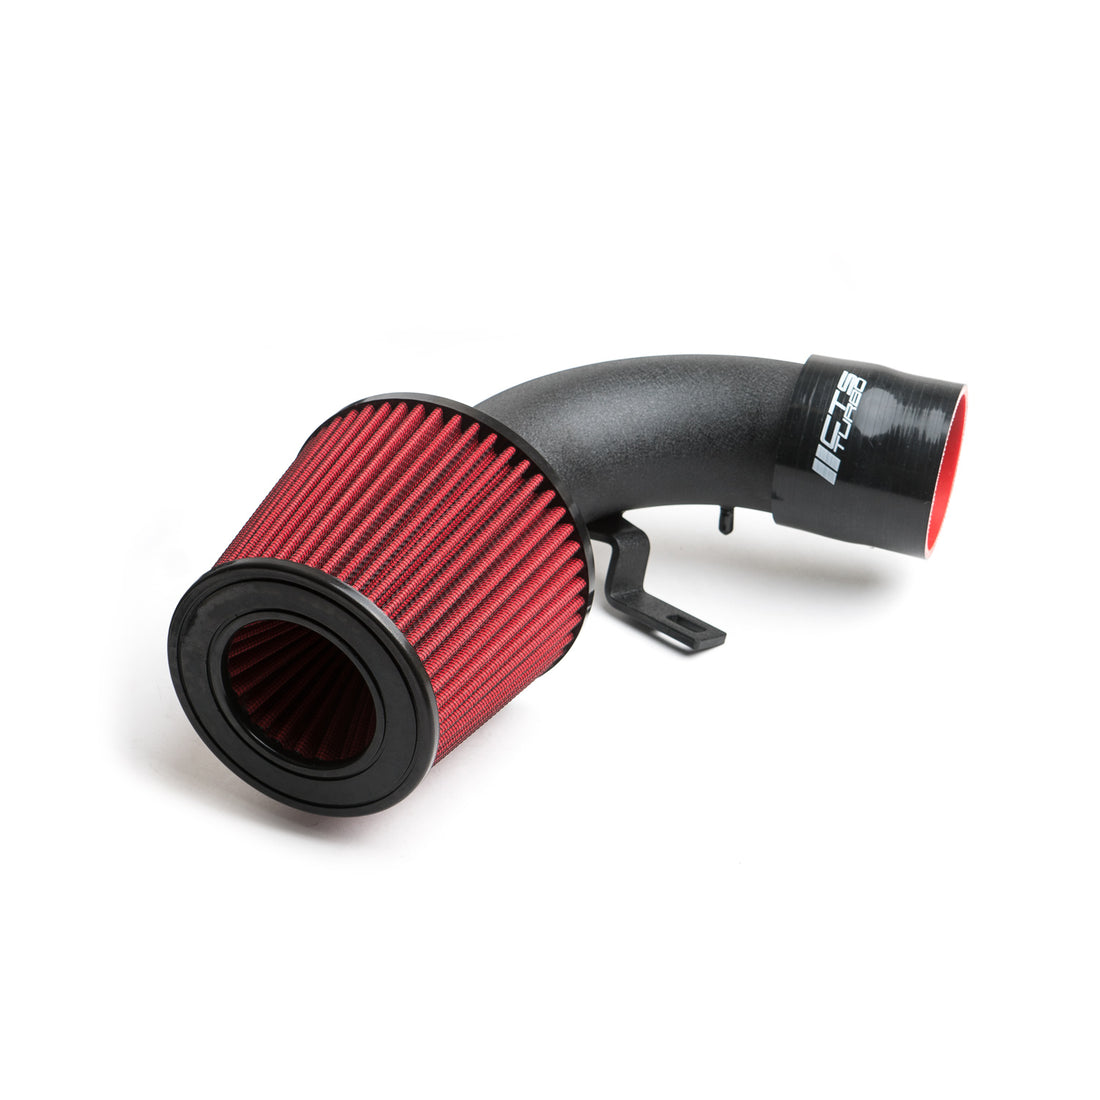 CTS Turbo 3" Air Intake System for 1.8TSI/2.0TSI (EA888.1 and EA888.3 non-MQB) CTS Turbo IT-220R